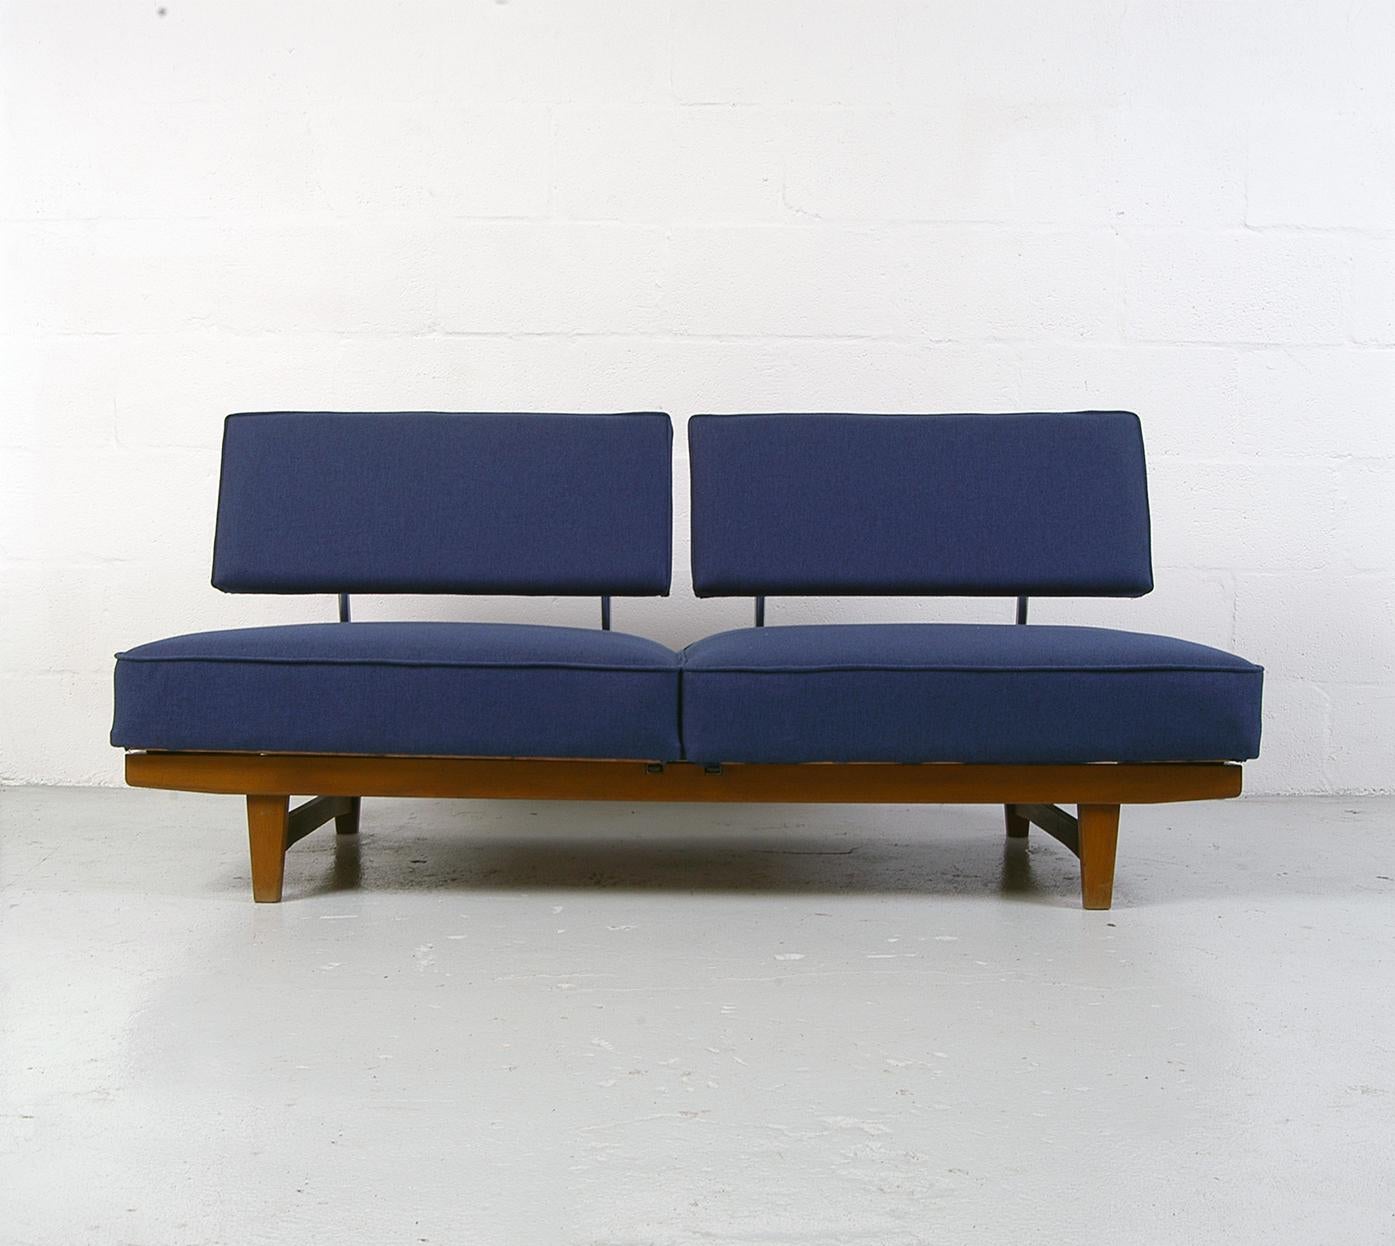 1950s Mid-Century Modern Knoll ‘Stella’ convertible daybed/sofa. Petite when folded, the sofa uses an ingenious ‘wheel in a track’ system as each seat cushion rotates through 90 degrees at the same time allowing the backrests to fall. It folds out